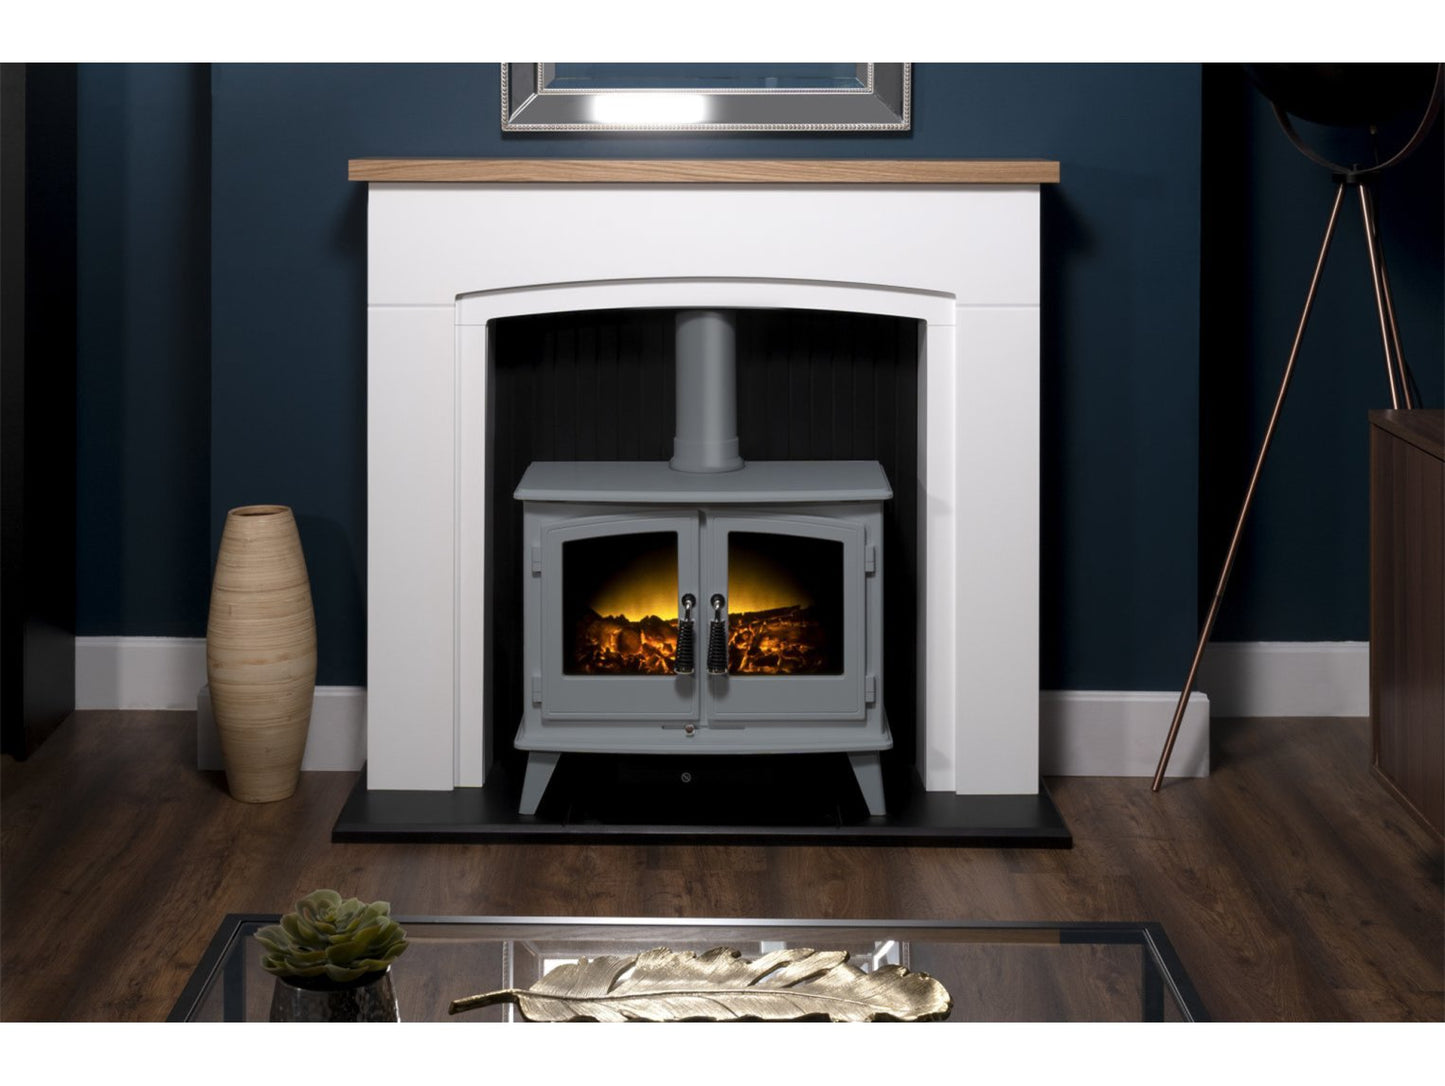 Adam Siena Stove Suite Pure White + Woodhouse Electric Stove Grey, 48"